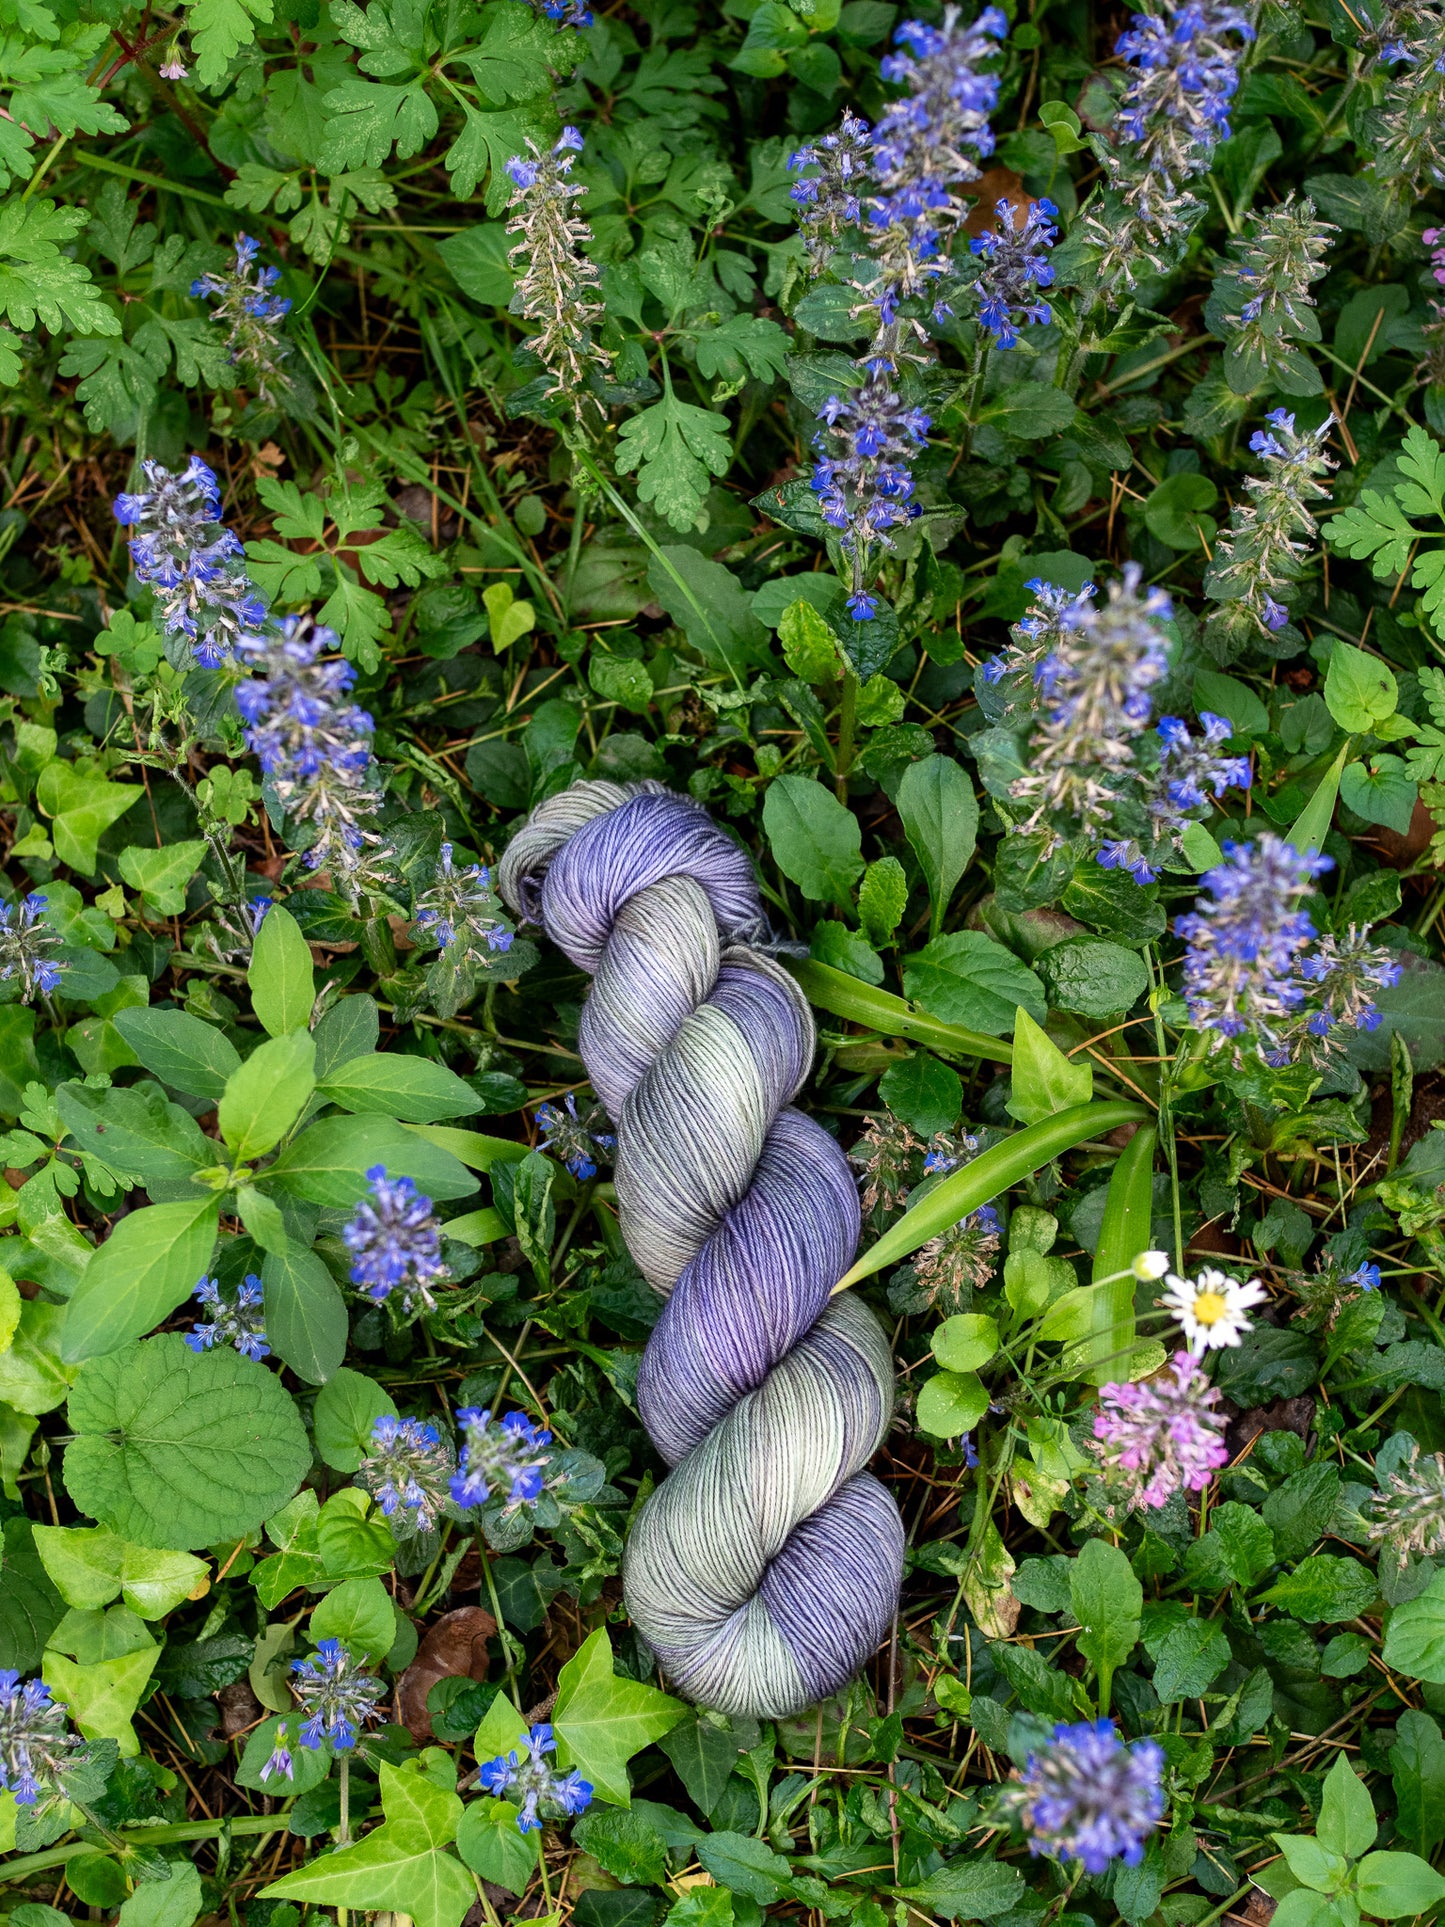 Ajuga - New color of the month - April